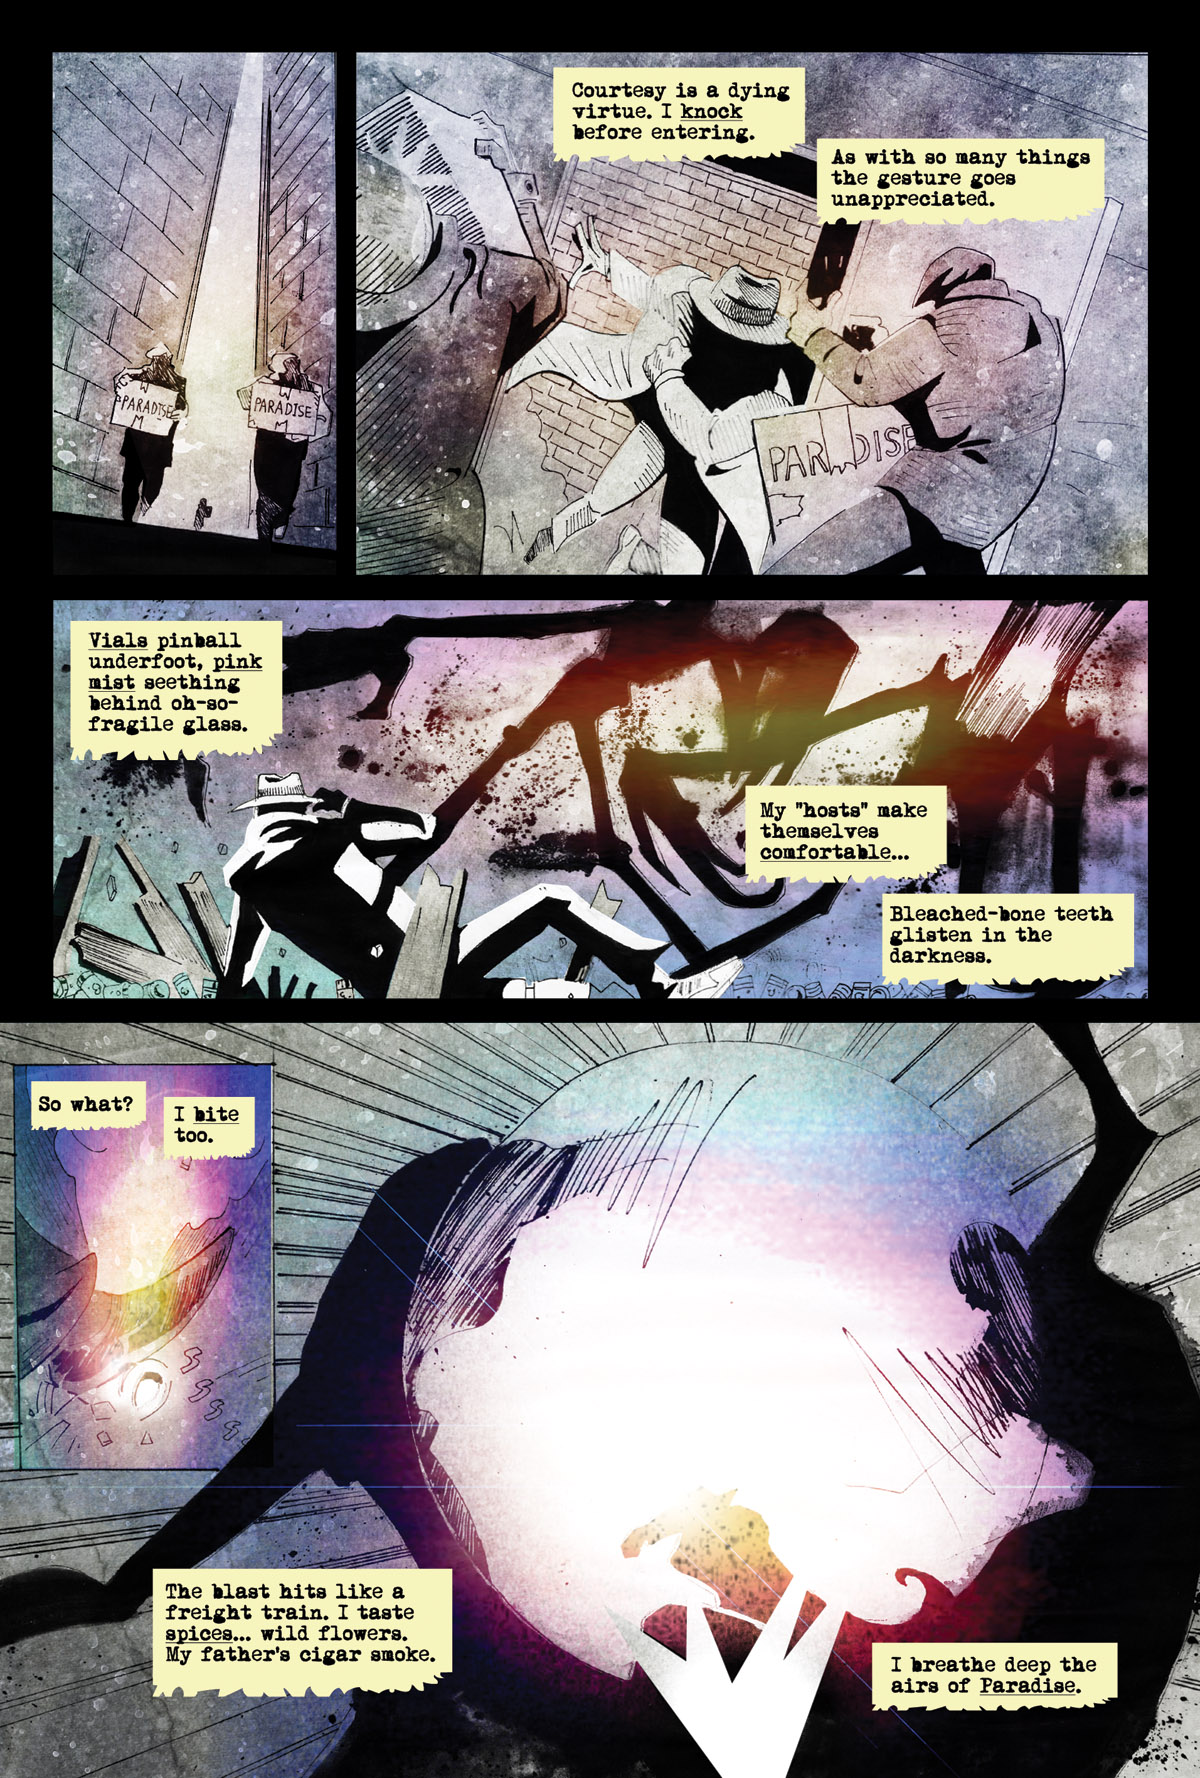 Afterlife Inc. | Silver Screen | Page 4